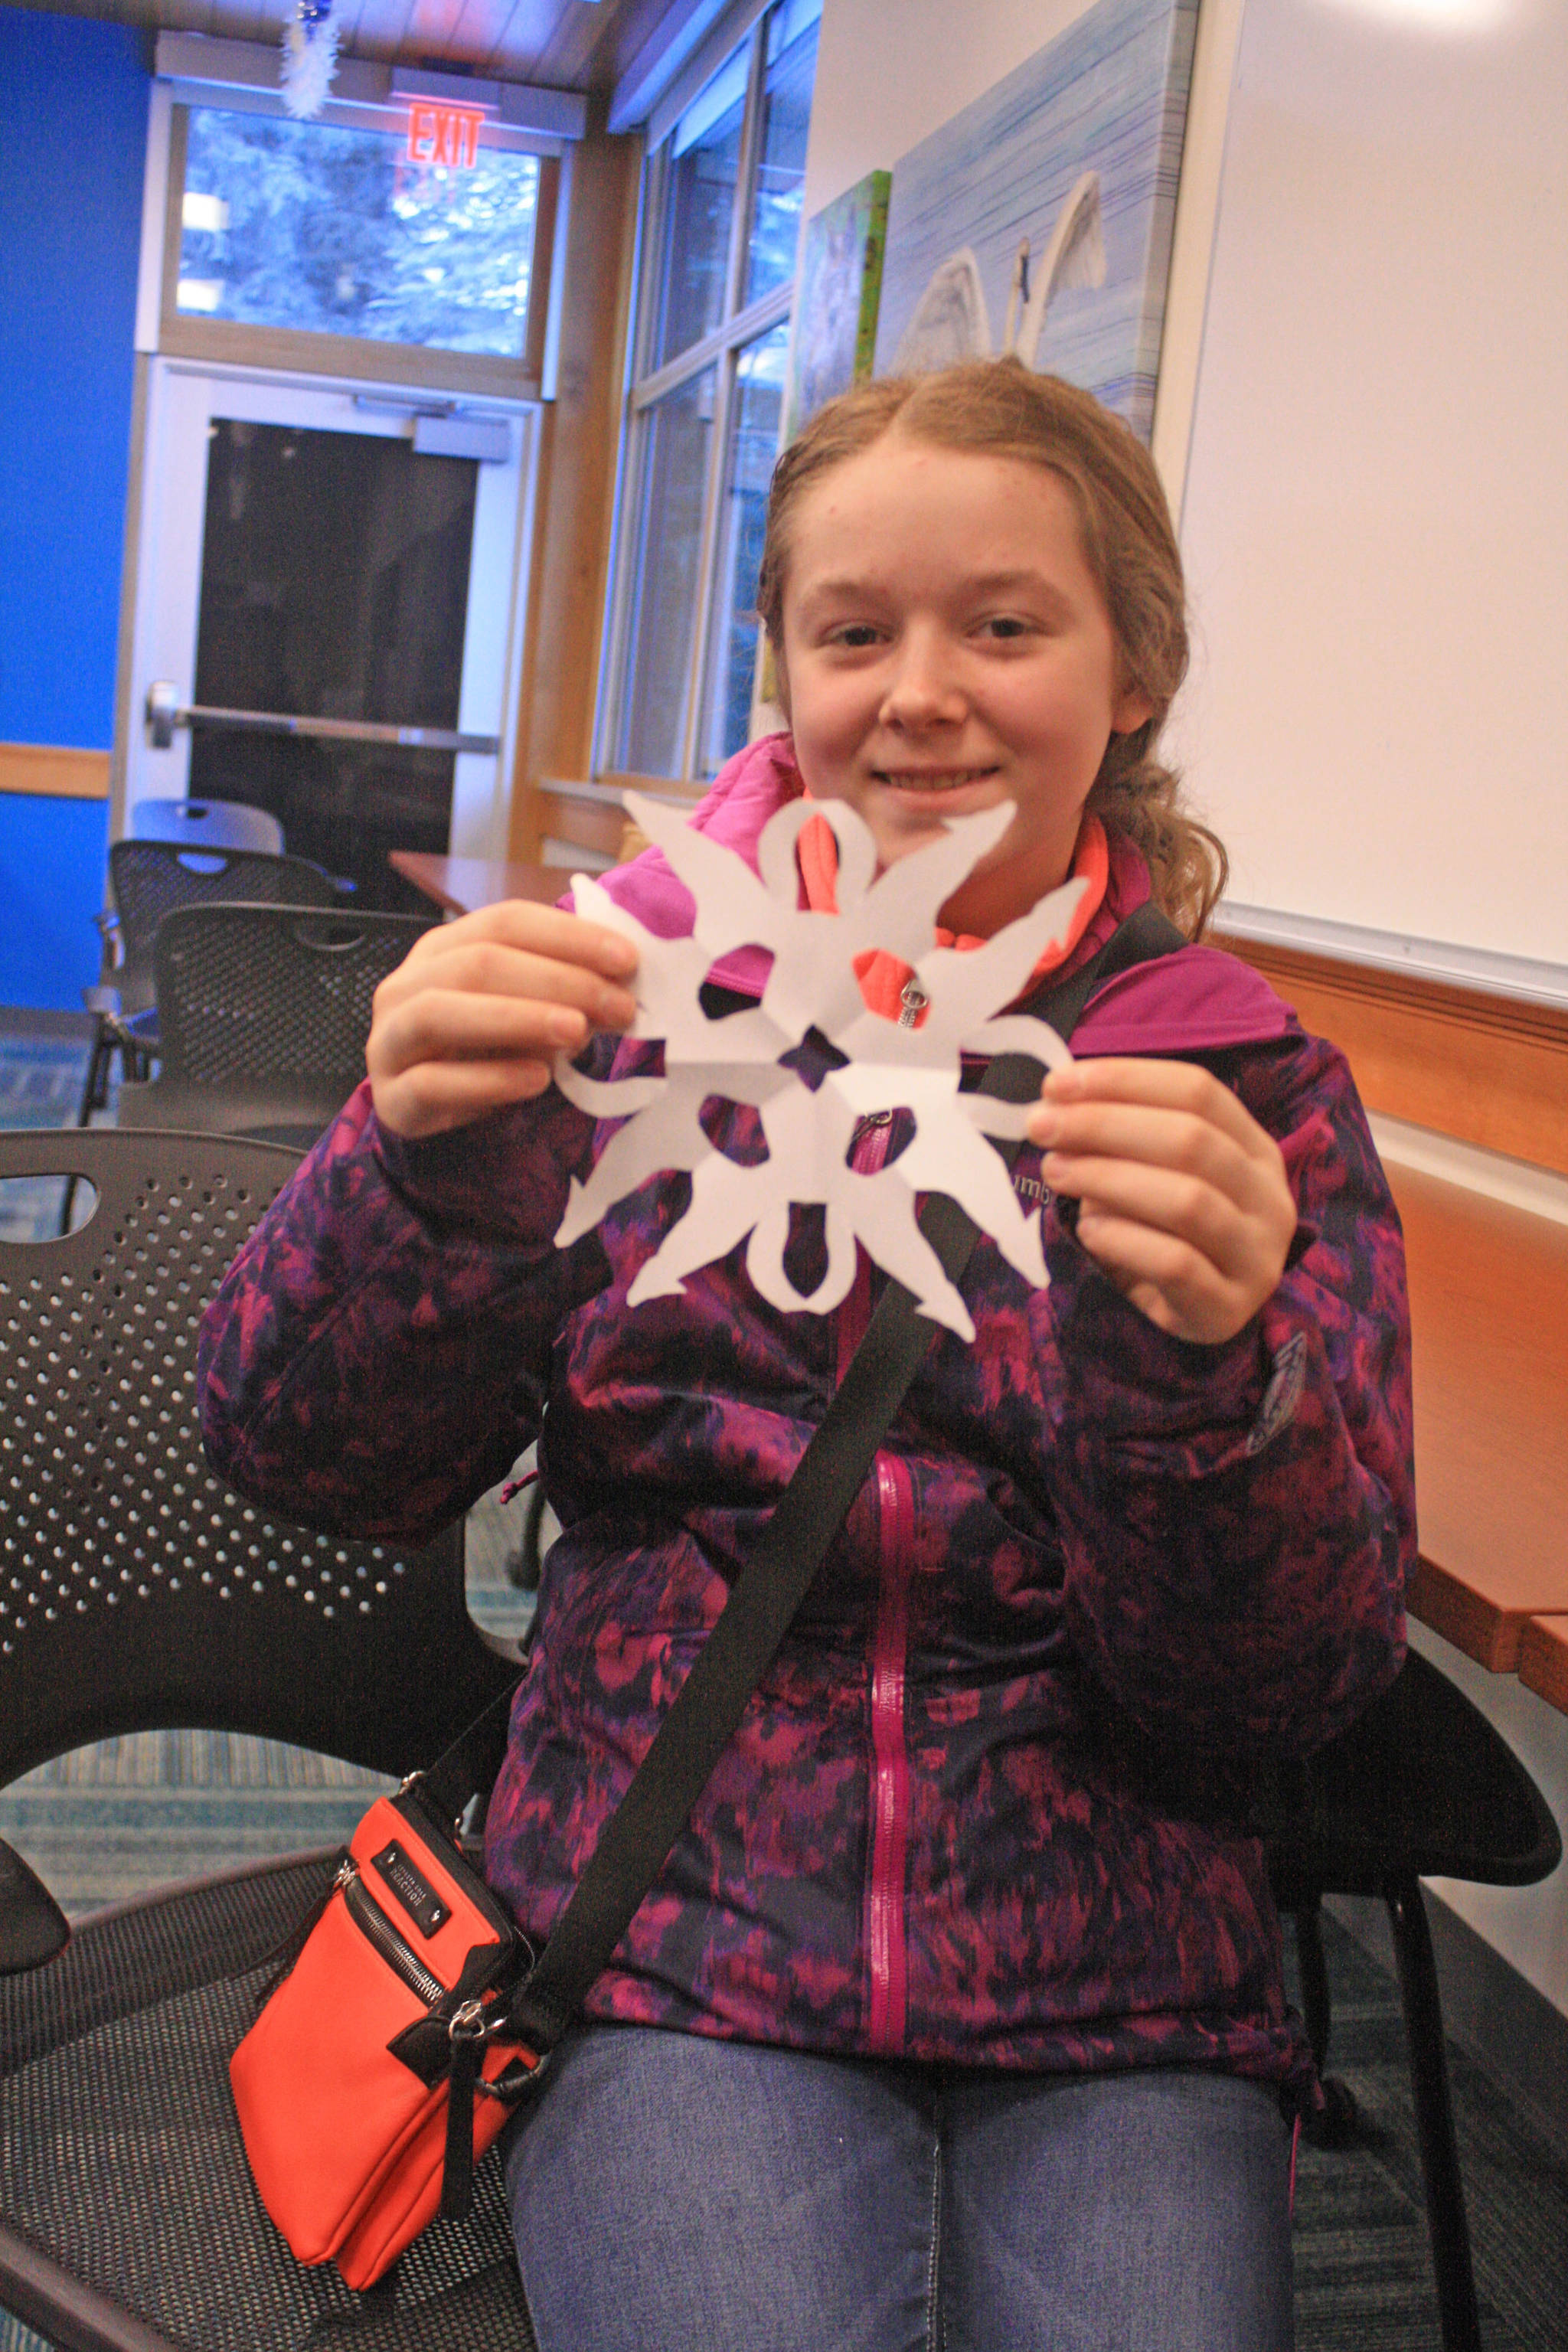 Audrey Larson, 13, shows off the paper snowflake she crafted while attending a family fun day at the Kenai National Wildlife Refuge Visitor Center on Dec. 27. (Photo by Erin Thompson/Peninsula Clarion)